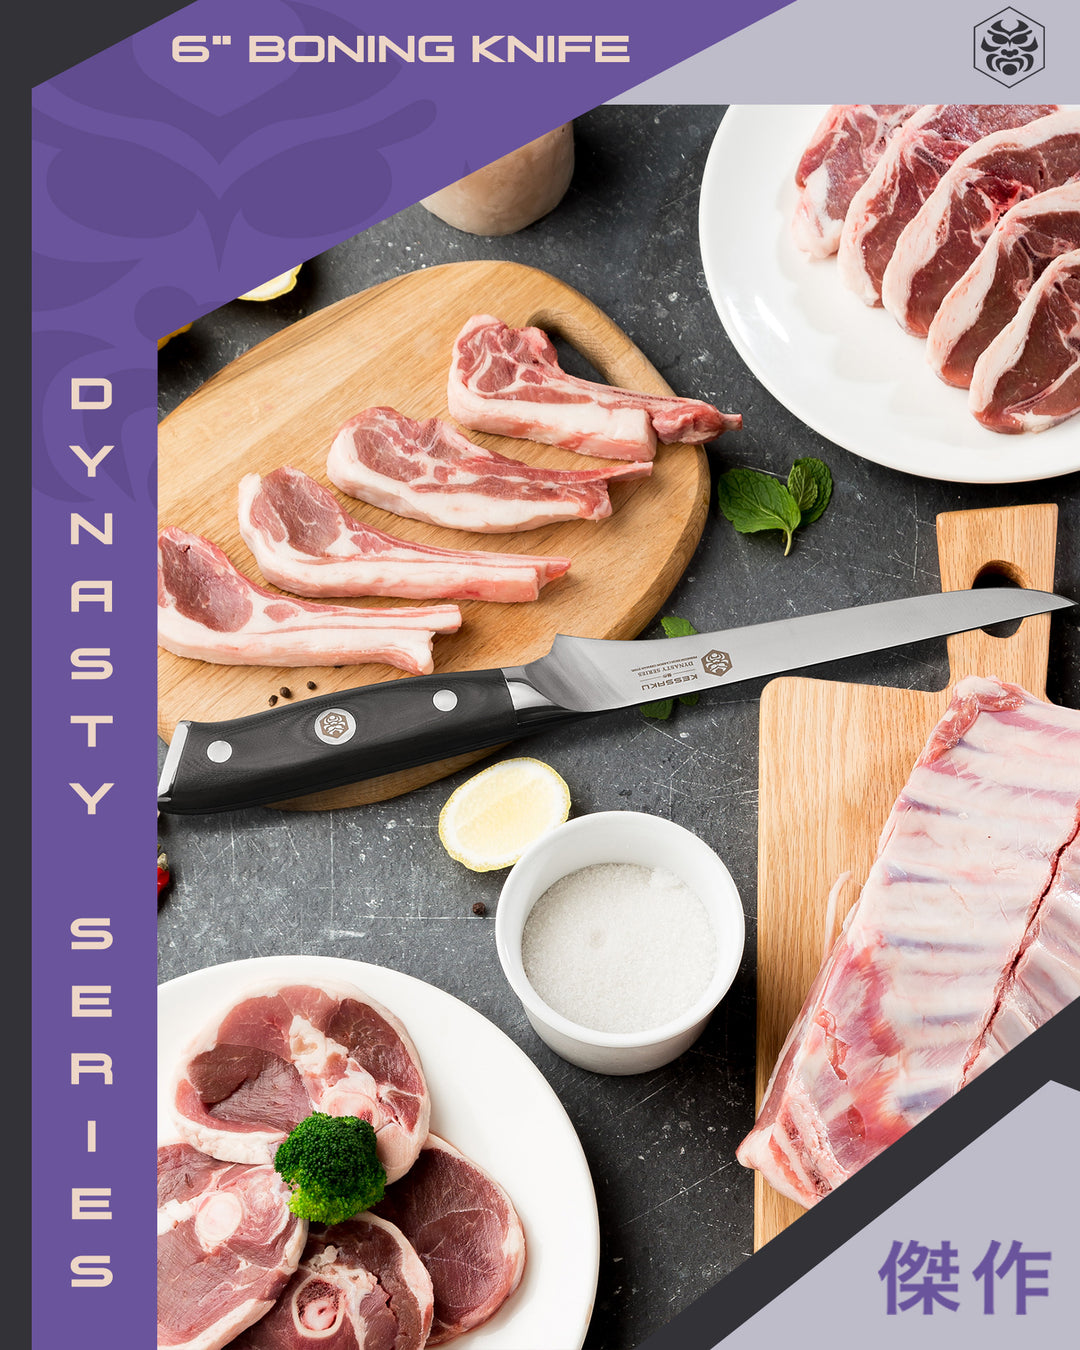 The Dynasty Boning Knife used to prep and assortment of ribs.